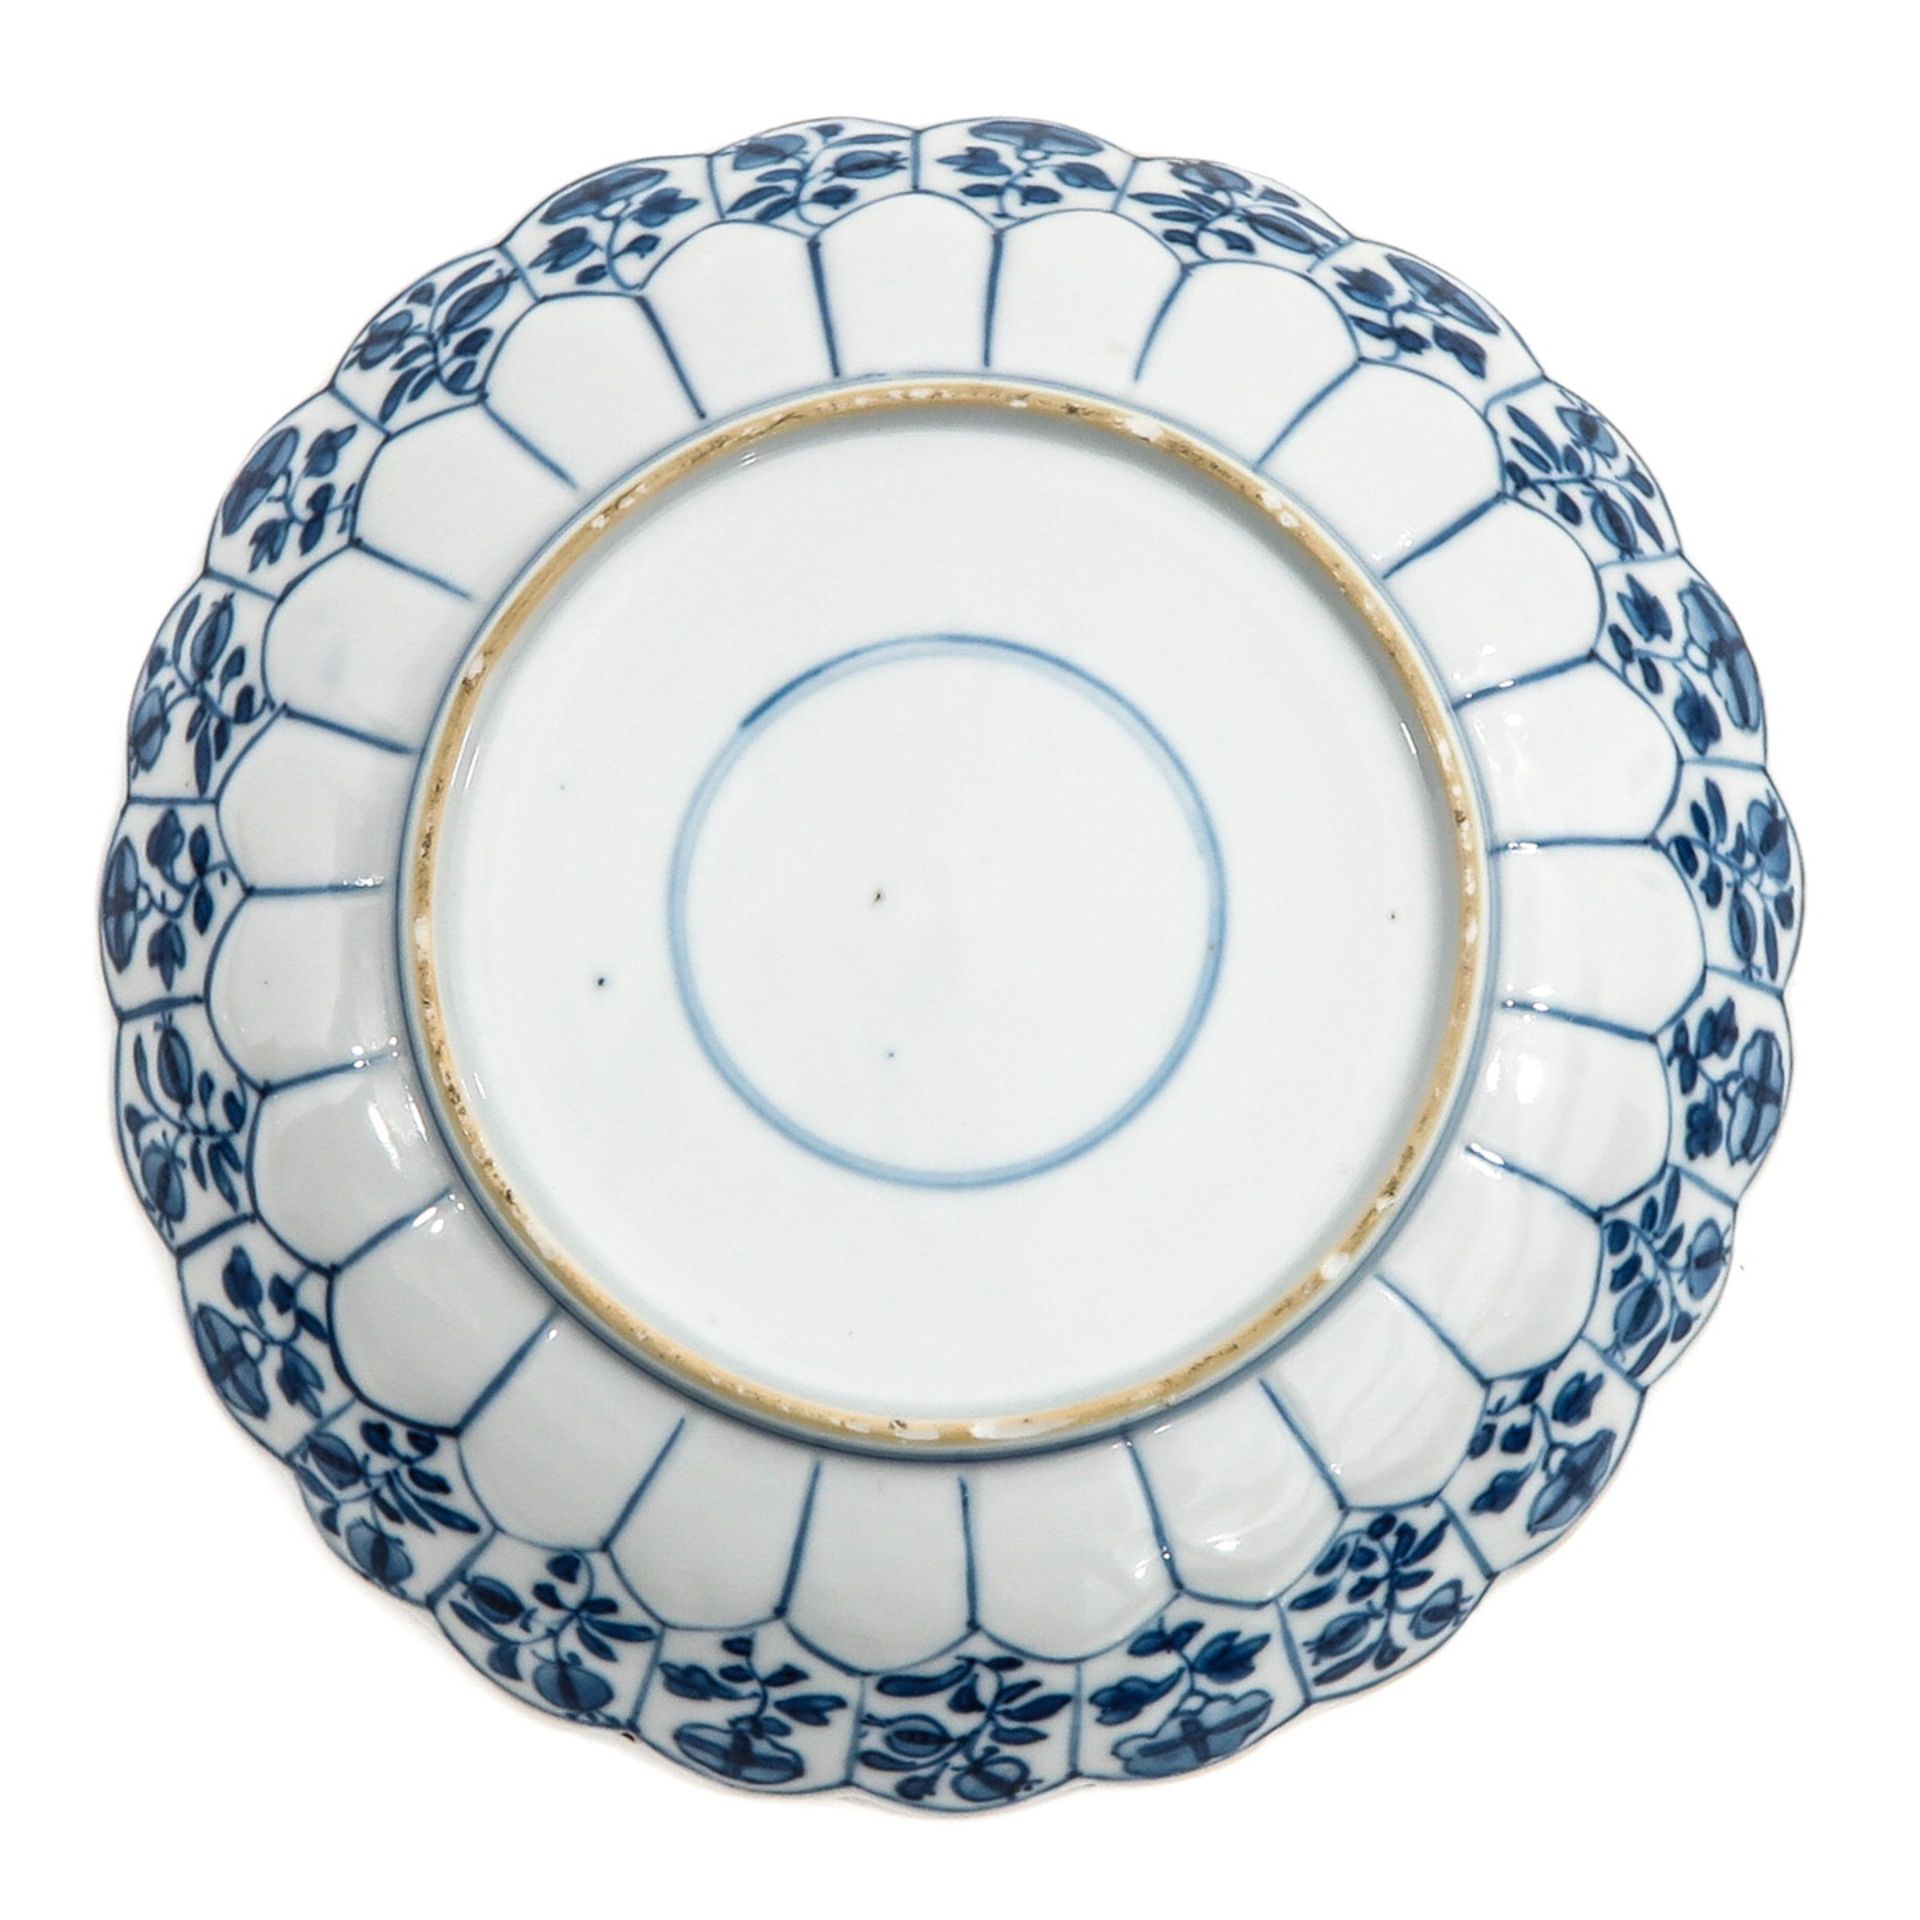 A Series of 3 Blue and White Plates - Image 8 of 10